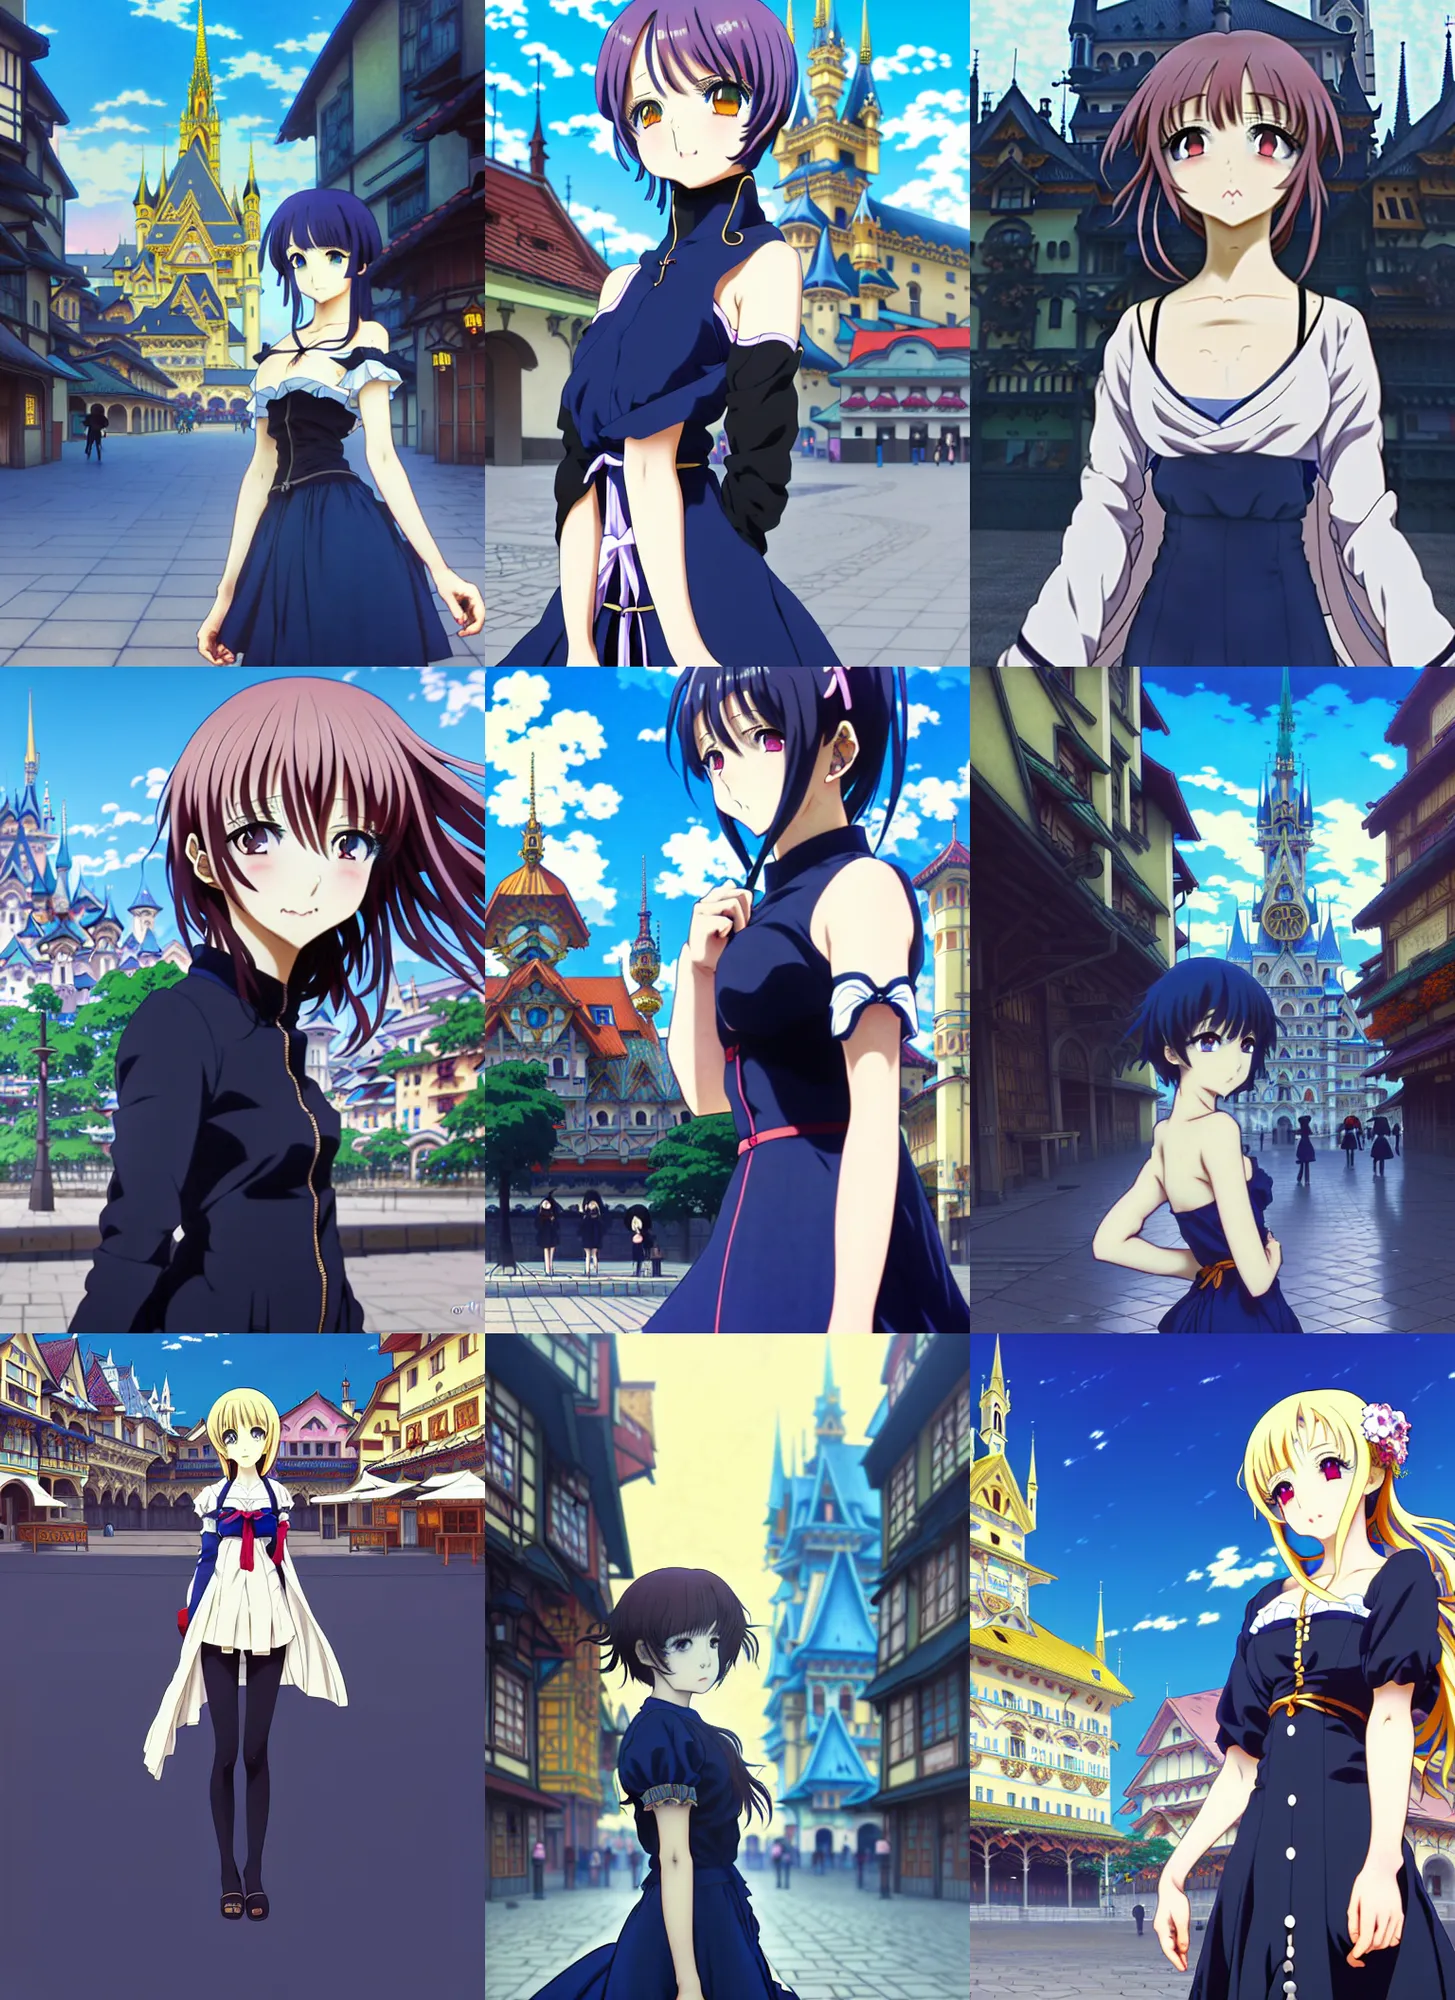 Prompt: anime frames, anime visual, full body portrait of a young woman in the medieval city square looking at the fantasy palace in the distance, cute face by ilya kuvshinov, alphonse mucha, dynamic pose, dynamic perspective, rounded eyes, moody, psycho pass, kyoani, gustav klimt, yoh yoshinari. dark blue tint